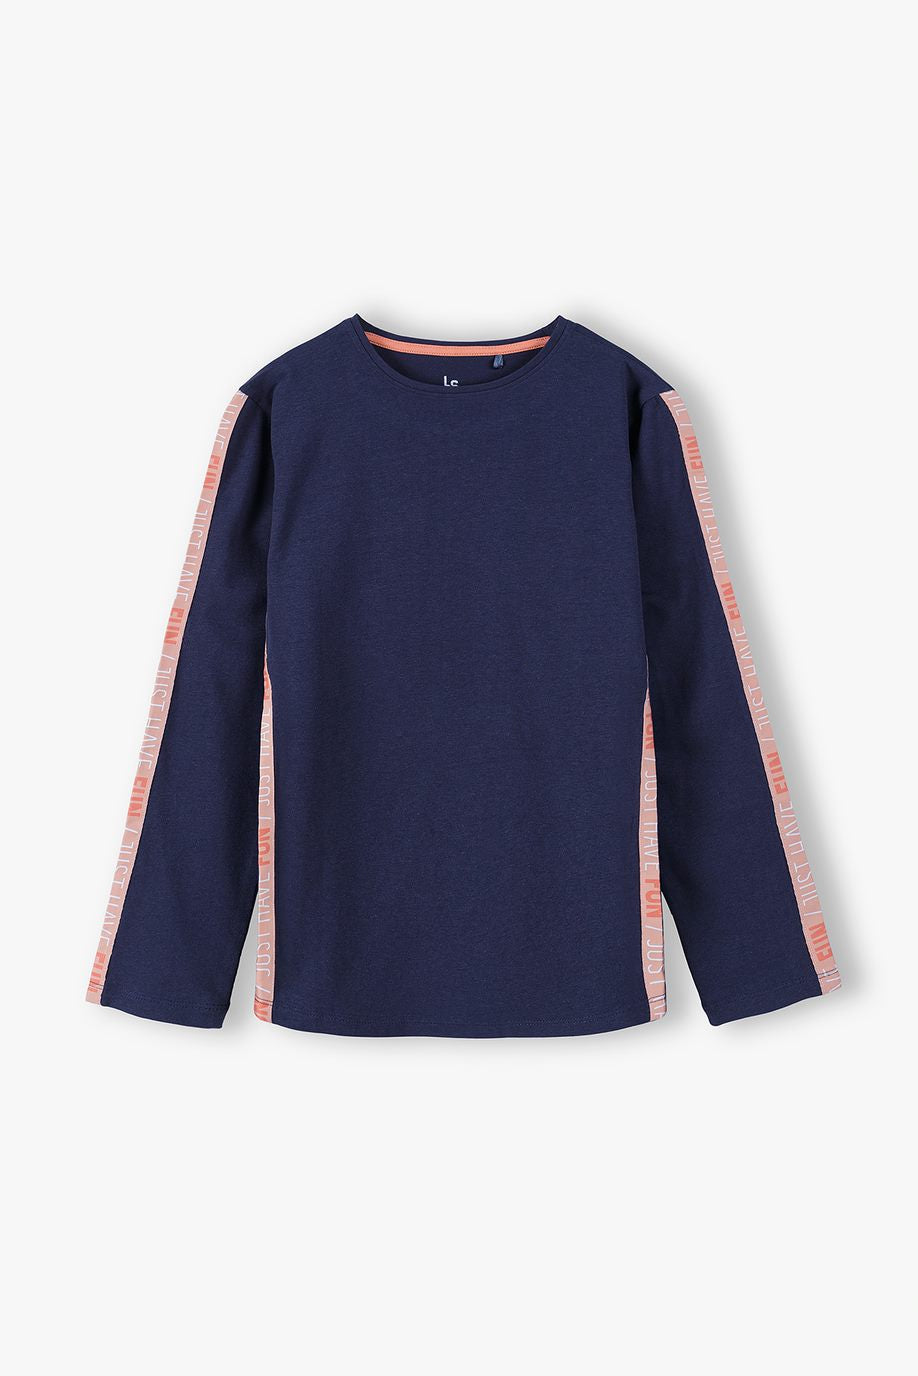 Navy blue long-sleeved blouse with pink stripes